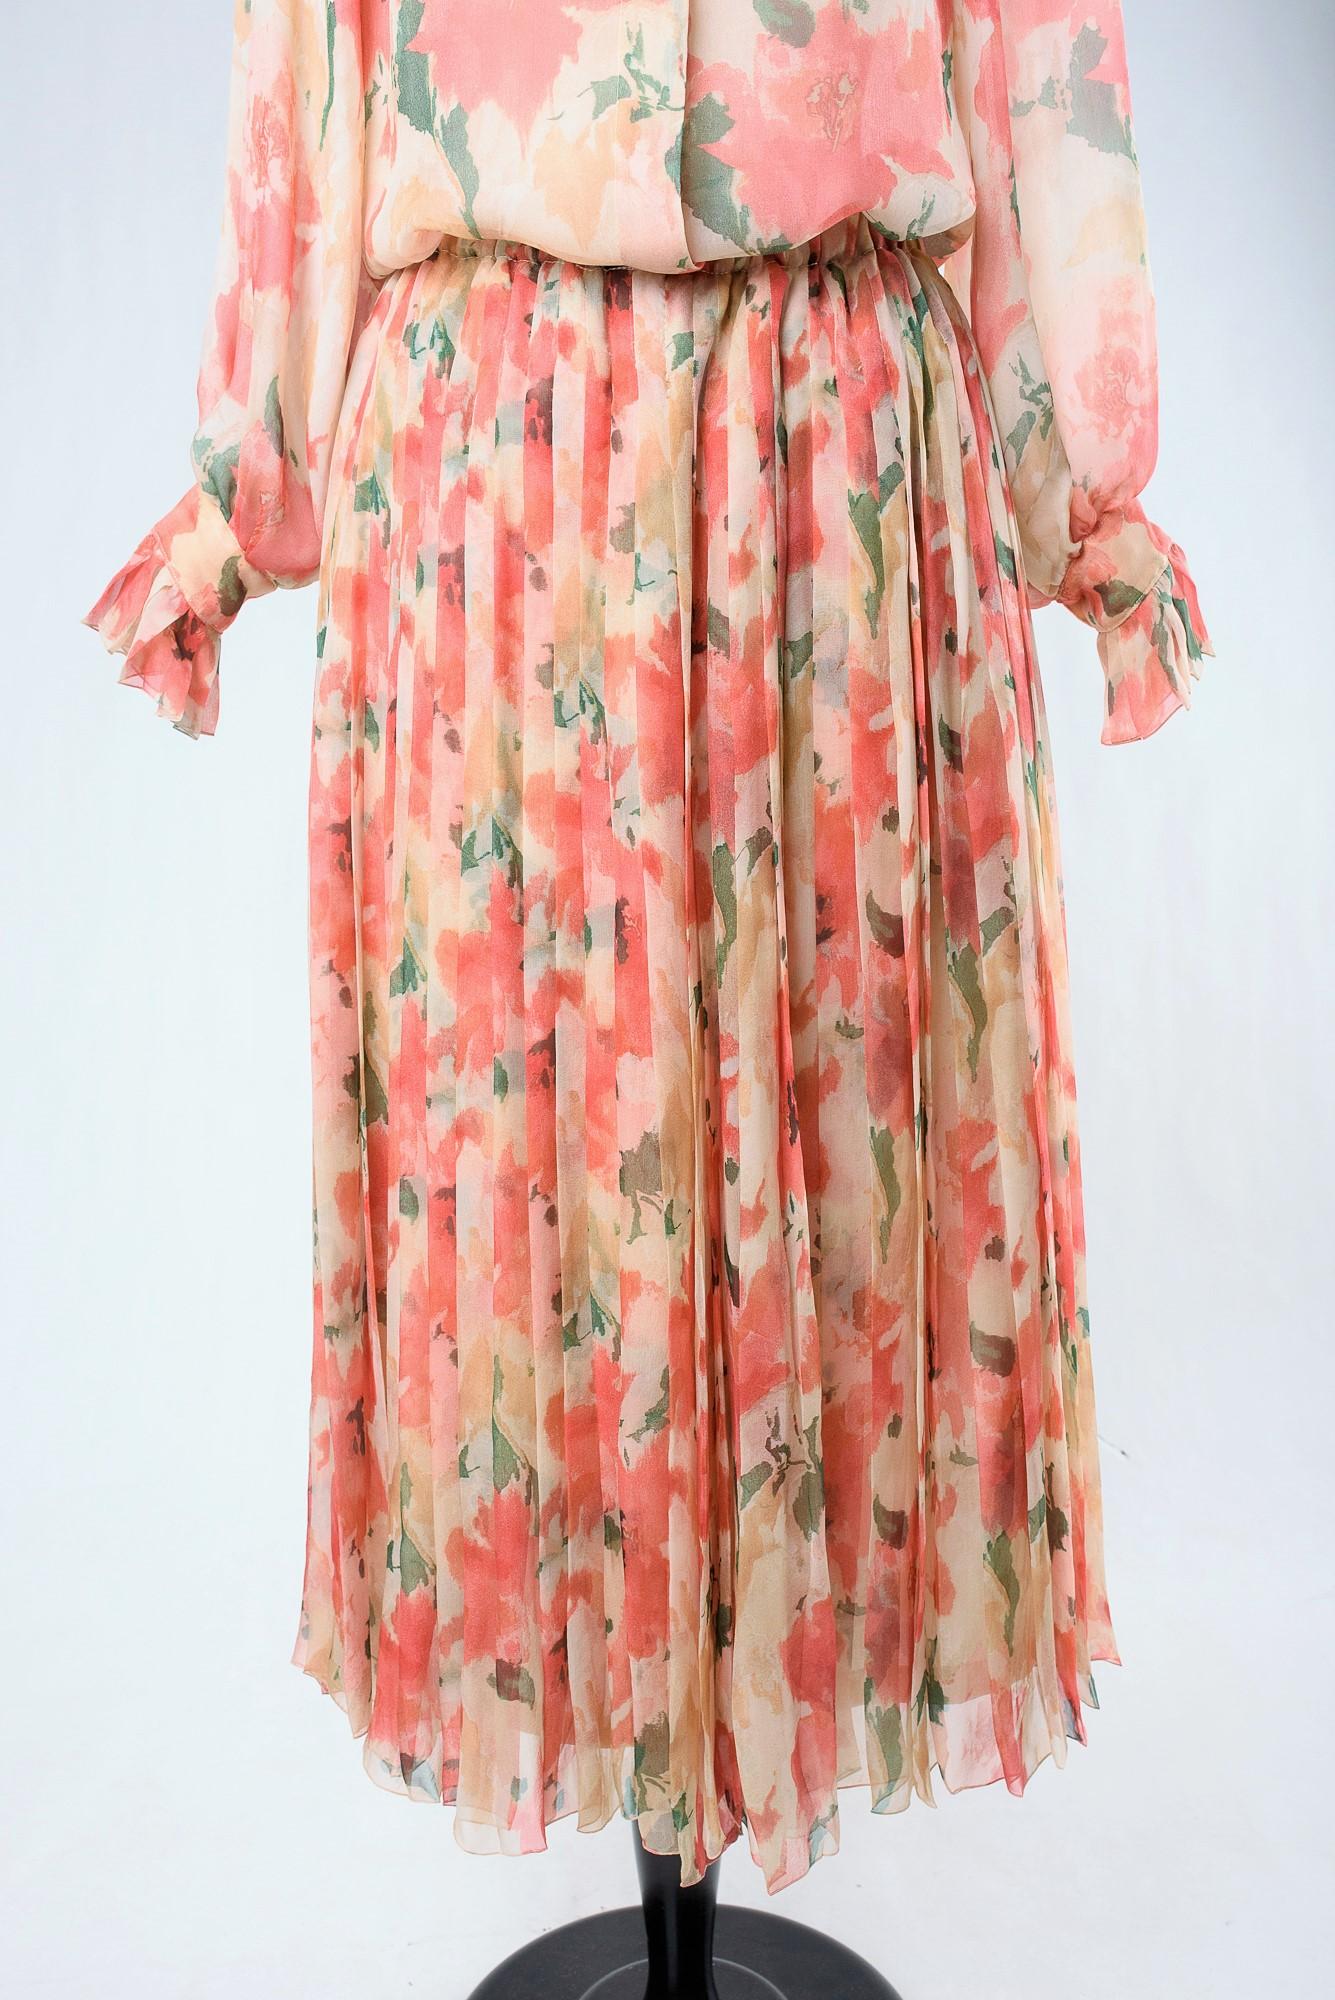 A Christian Dior boutique Chiffon blouse and skirt By Marc Bohan Circa 1980 For Sale 4